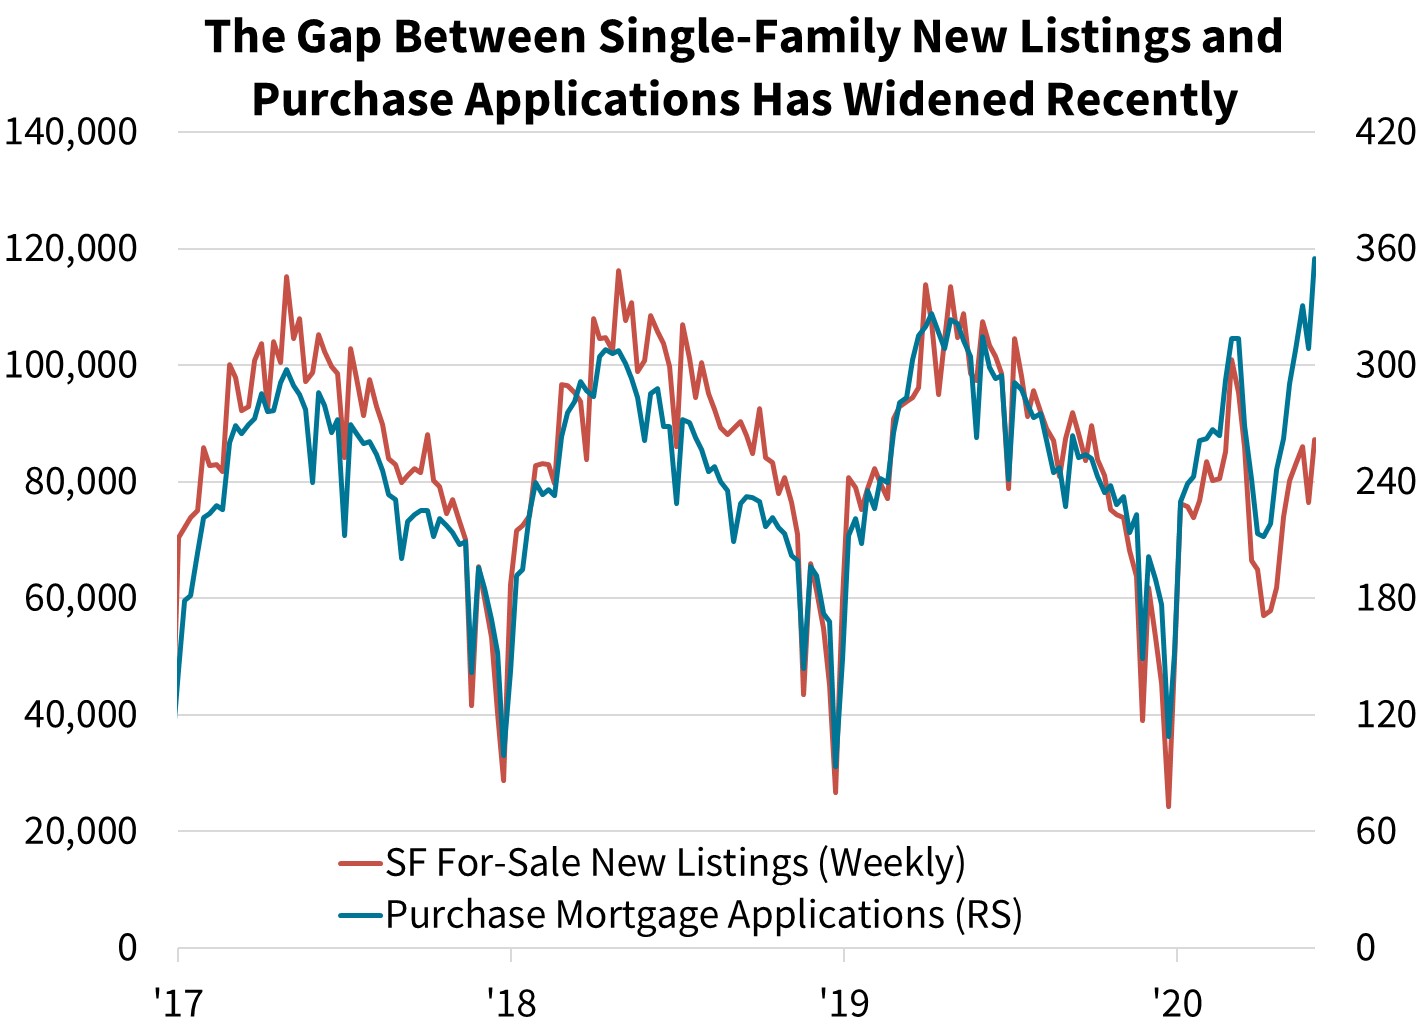  The Gap Between Single-Family New Listings an Purchase Applications Has Widened Recently